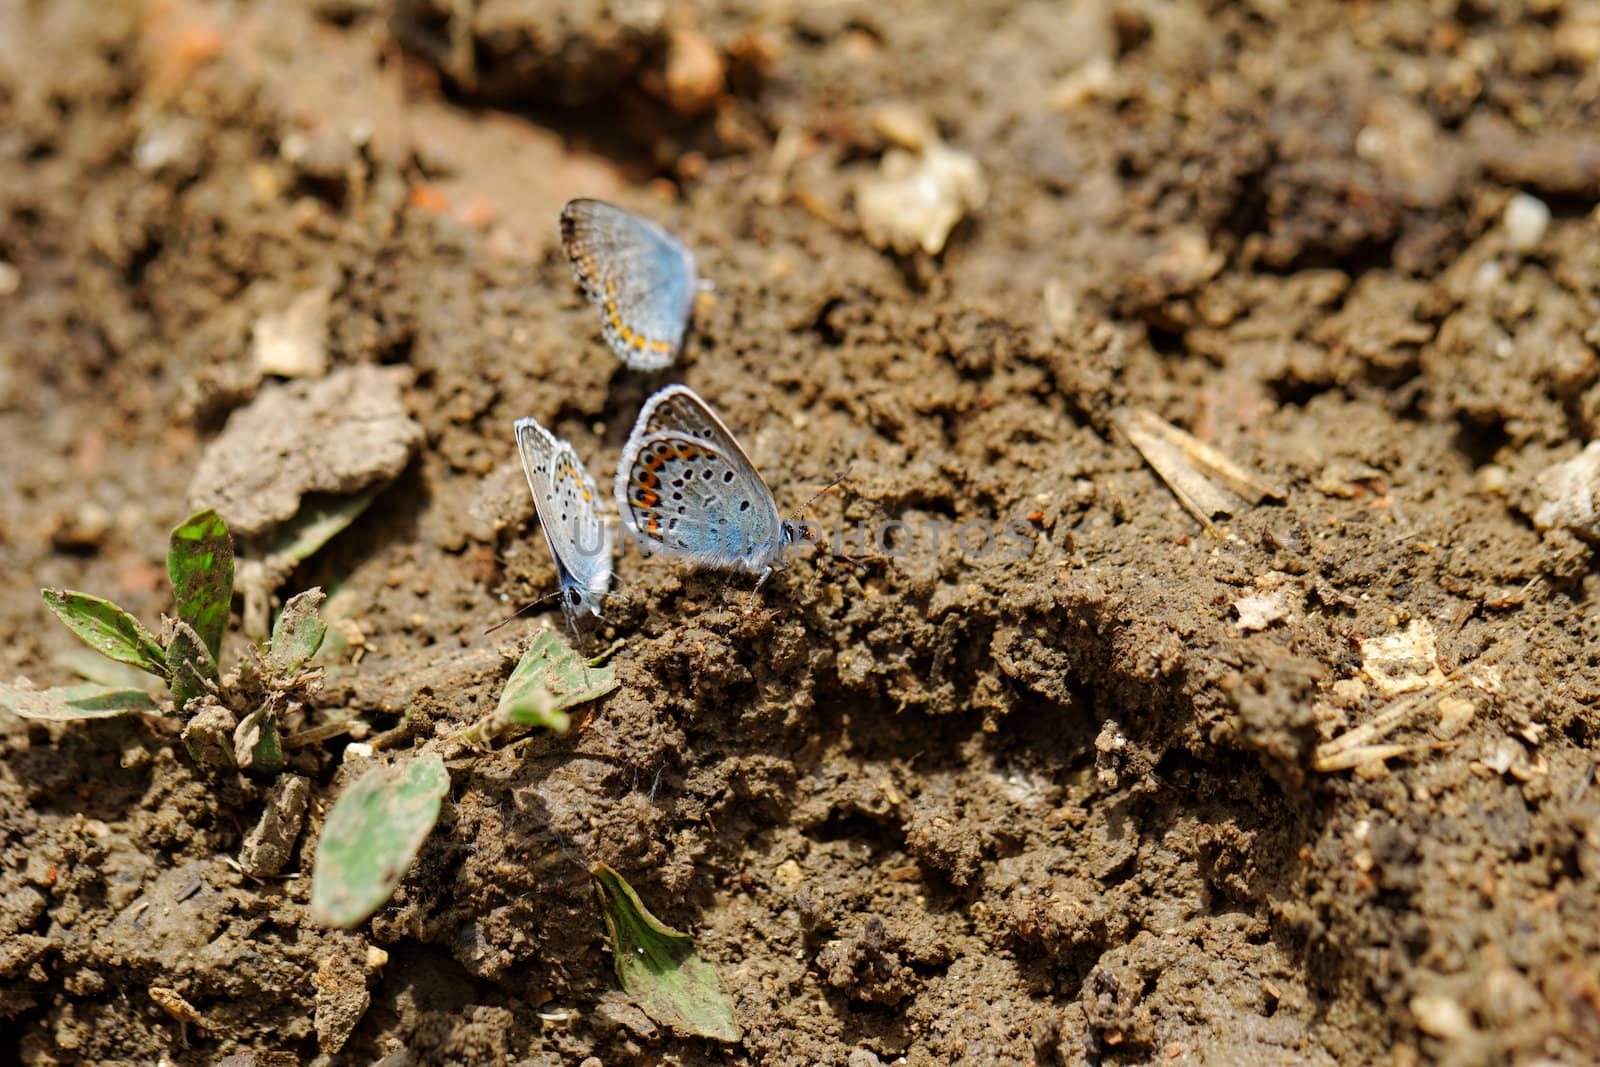 The Silver-studded Blue (Plebejus argus) is a butterfly in the family Lycaenidae